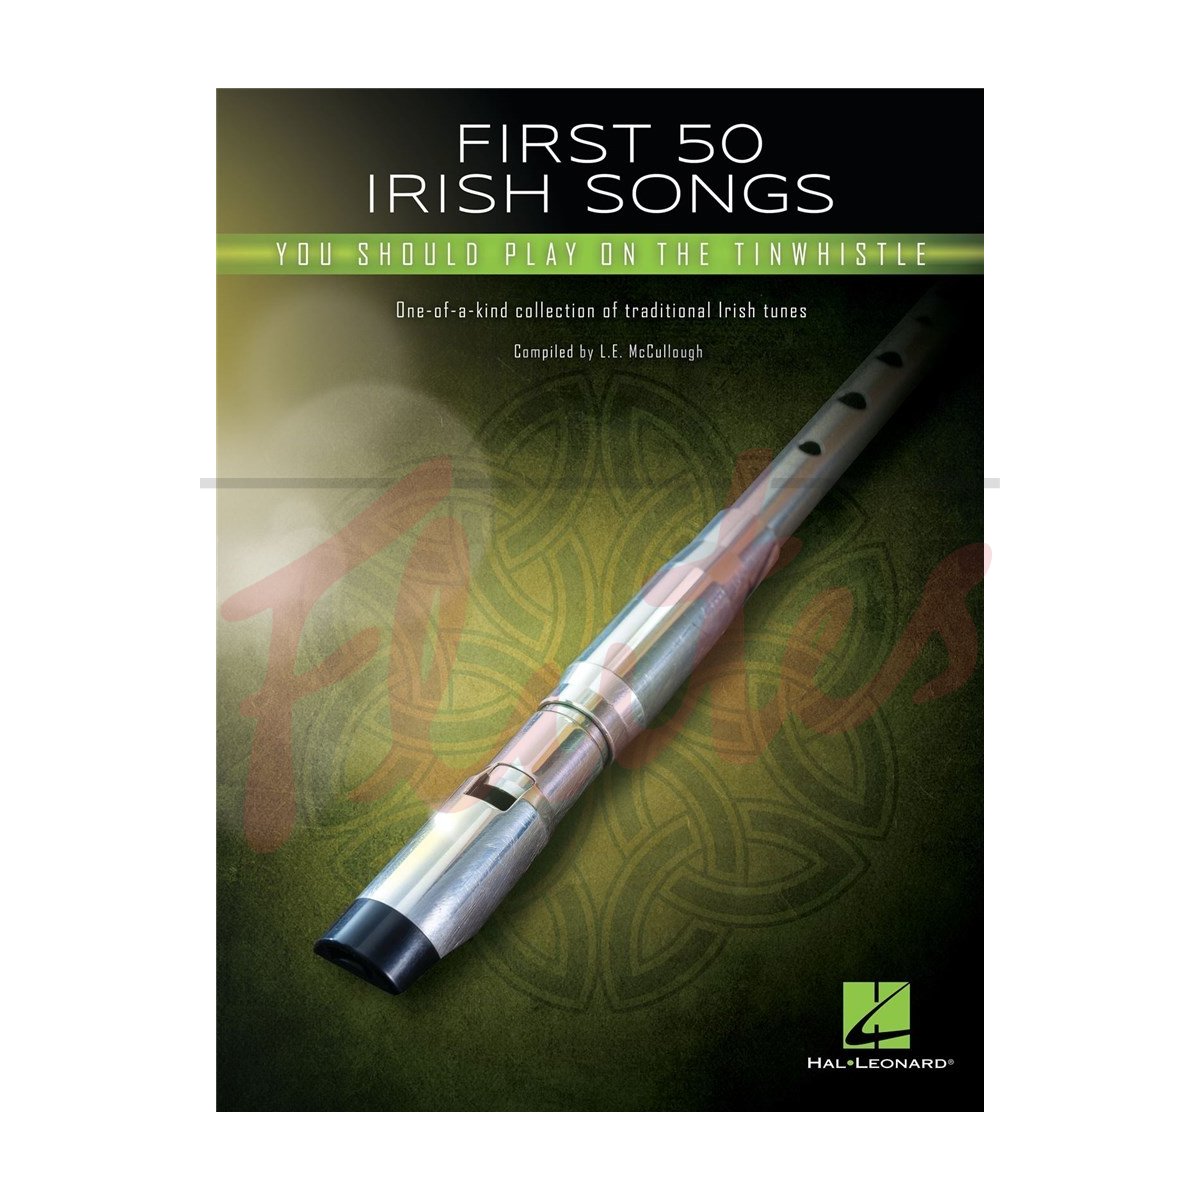 First 50 Irish Songs You Should Play On The Tinwhistle